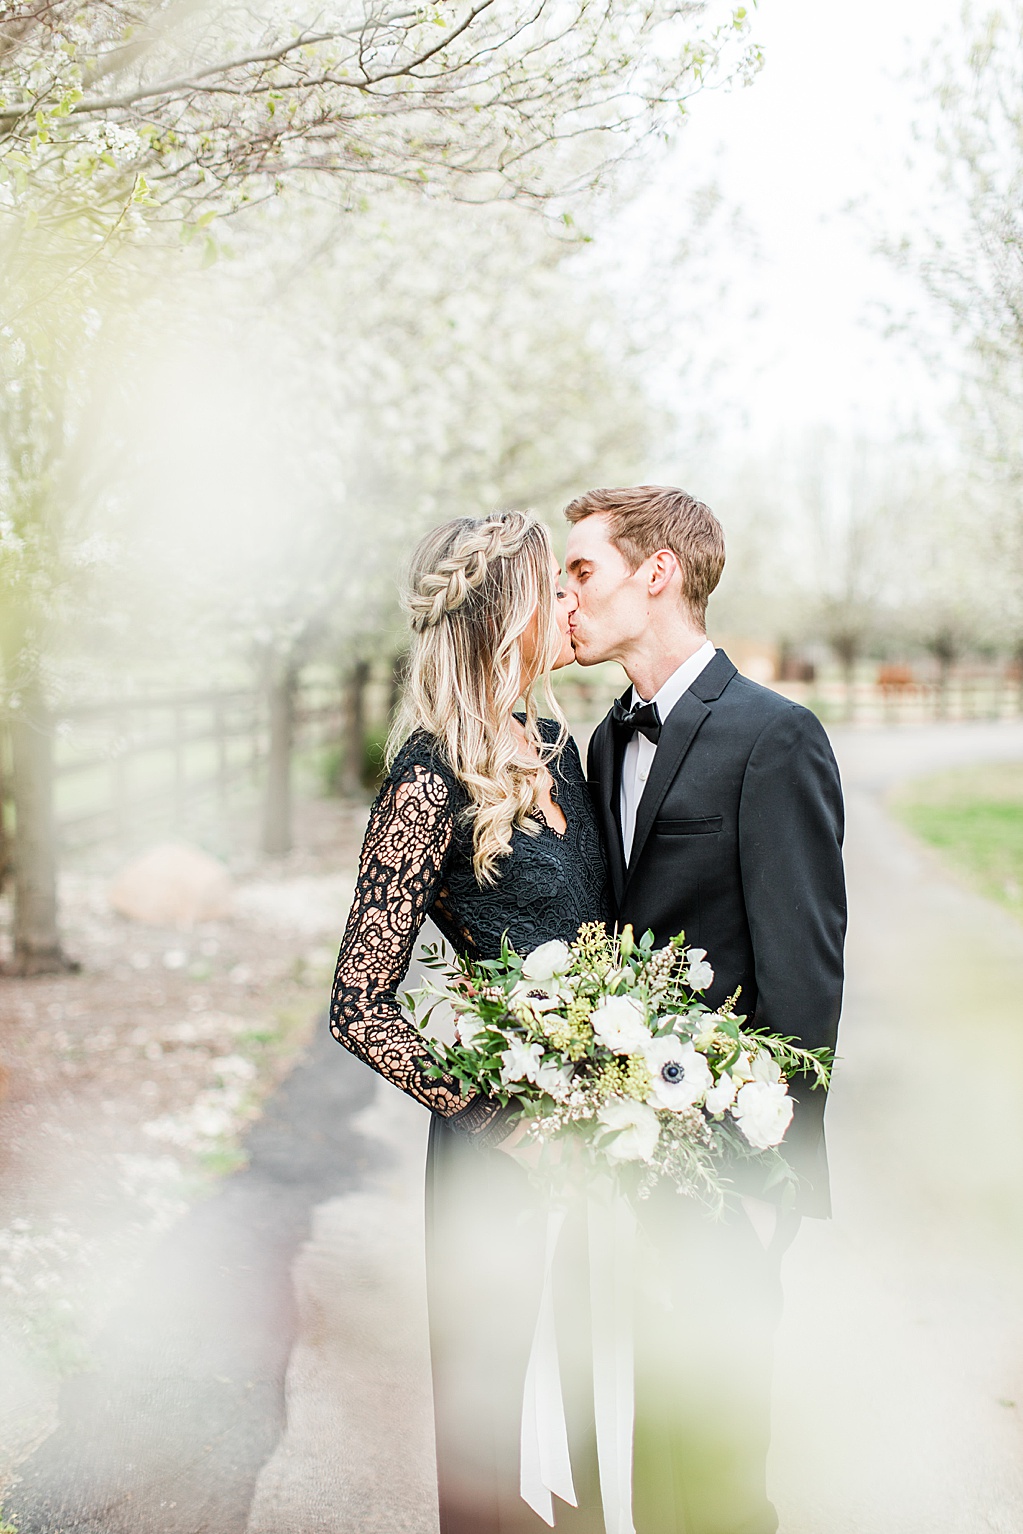 King River Ranch Wedding Venue in Johnson City Engagement Photos in the white Pear blossoms by Allison Jeffers Wedding Photography 0013